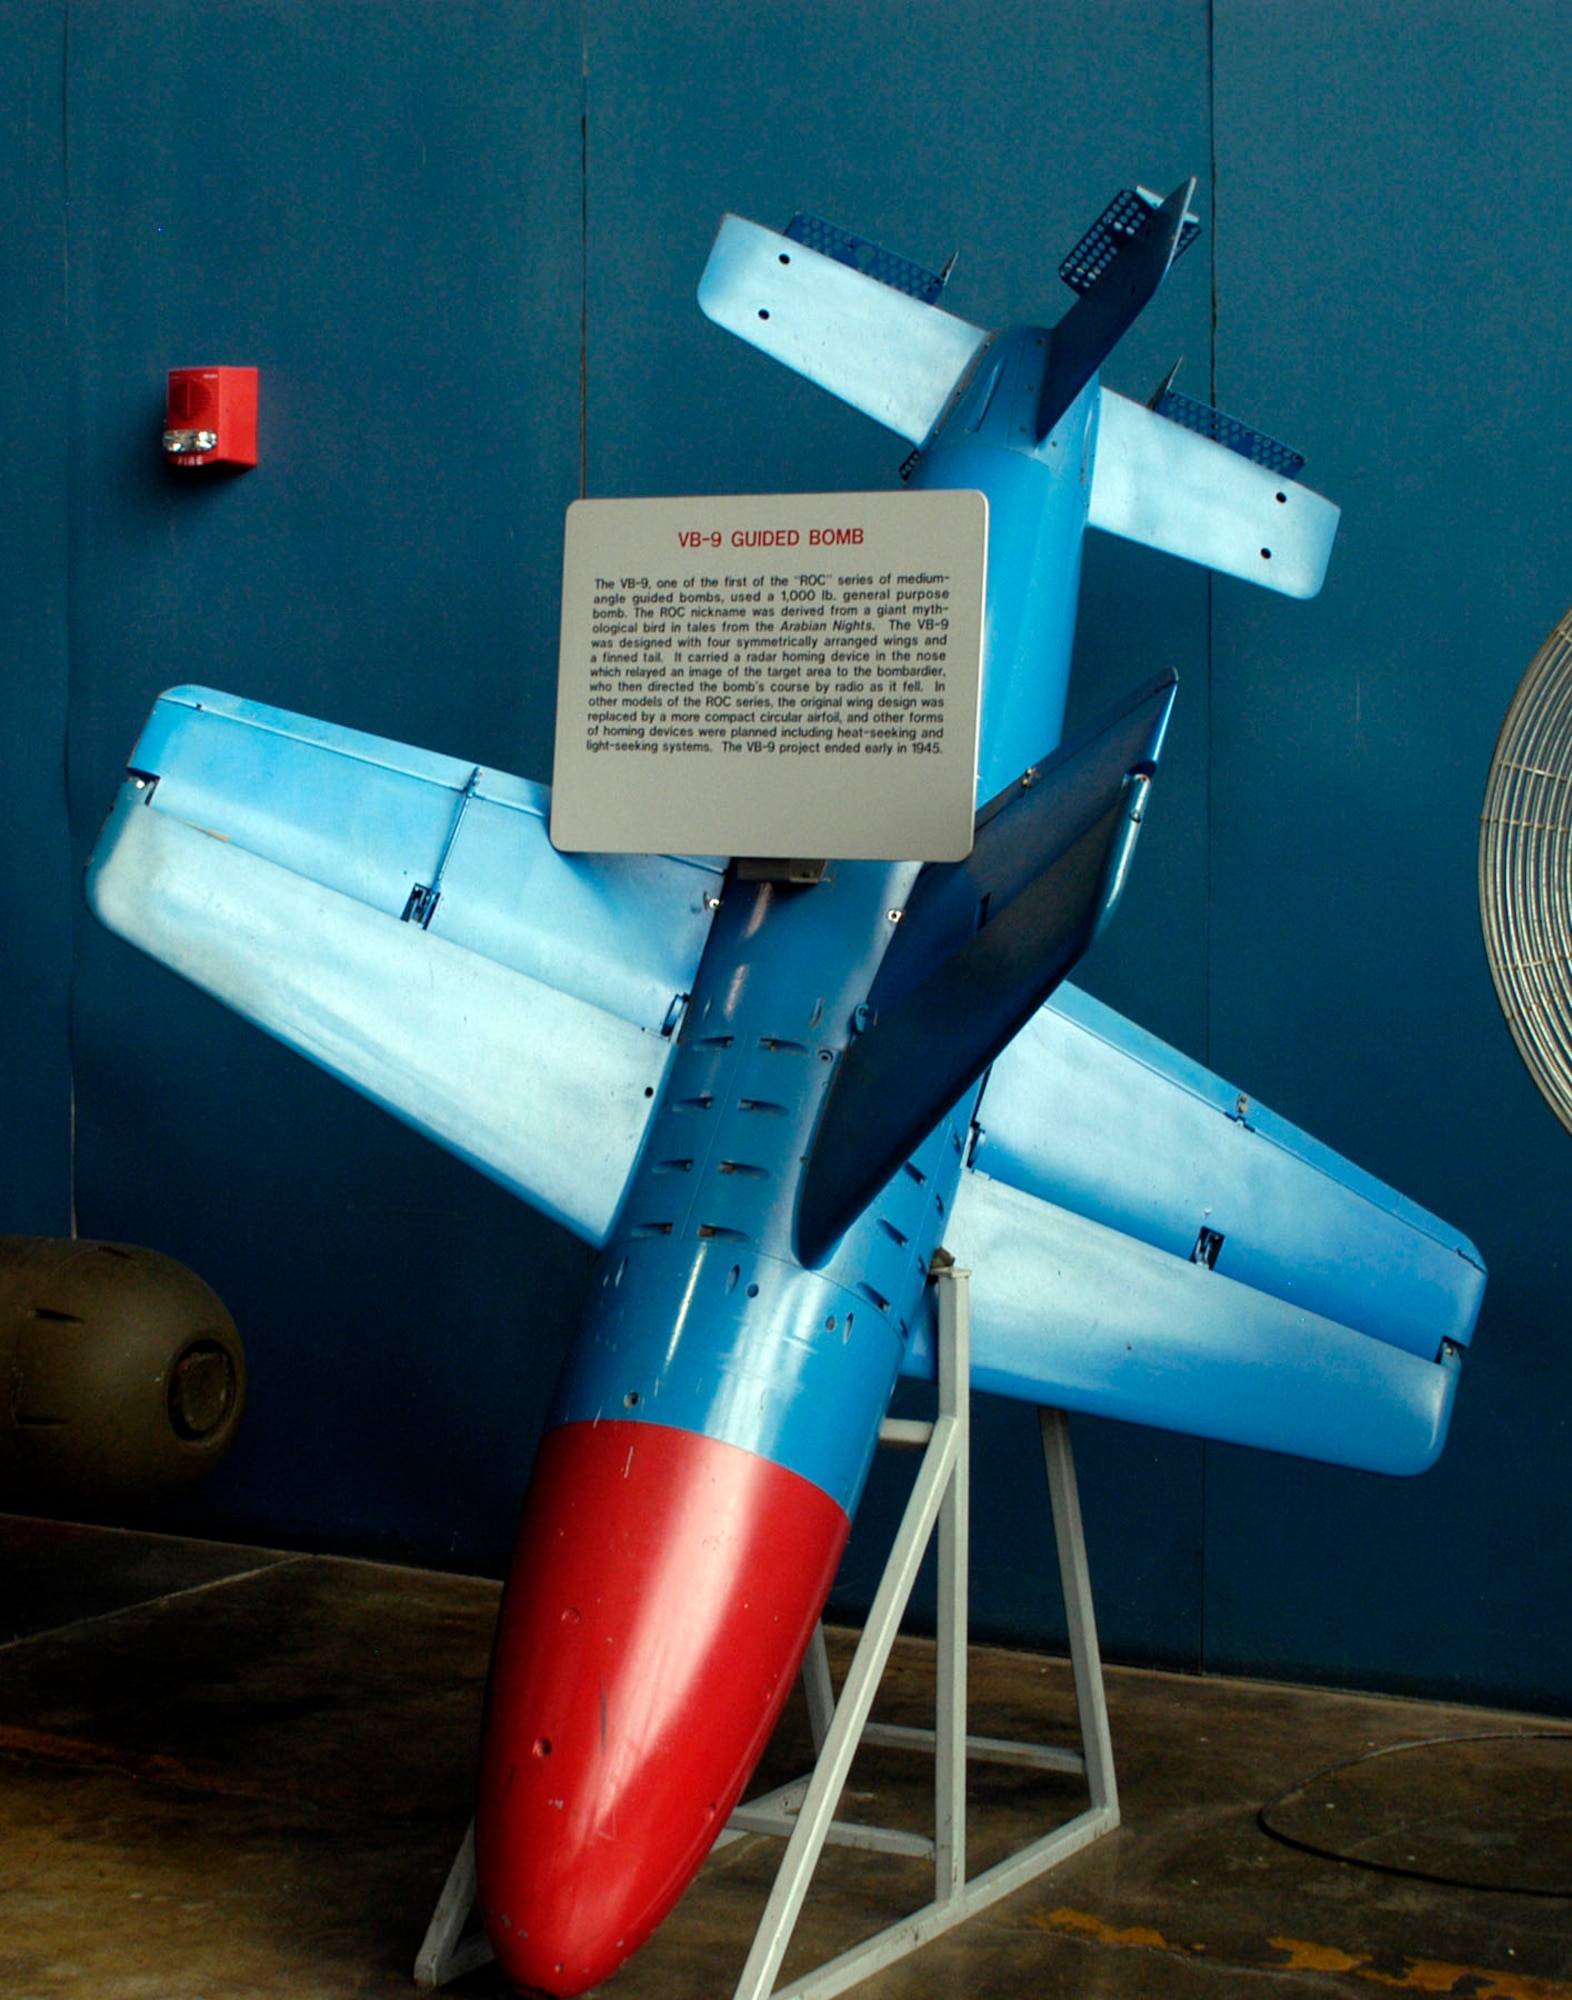 DAYTON, Ohio - The VB-9 Guided Bomb on display in the Research & Development Gallery at the National Museum of the U.S. Air Force. (U.S. Air Force photo)